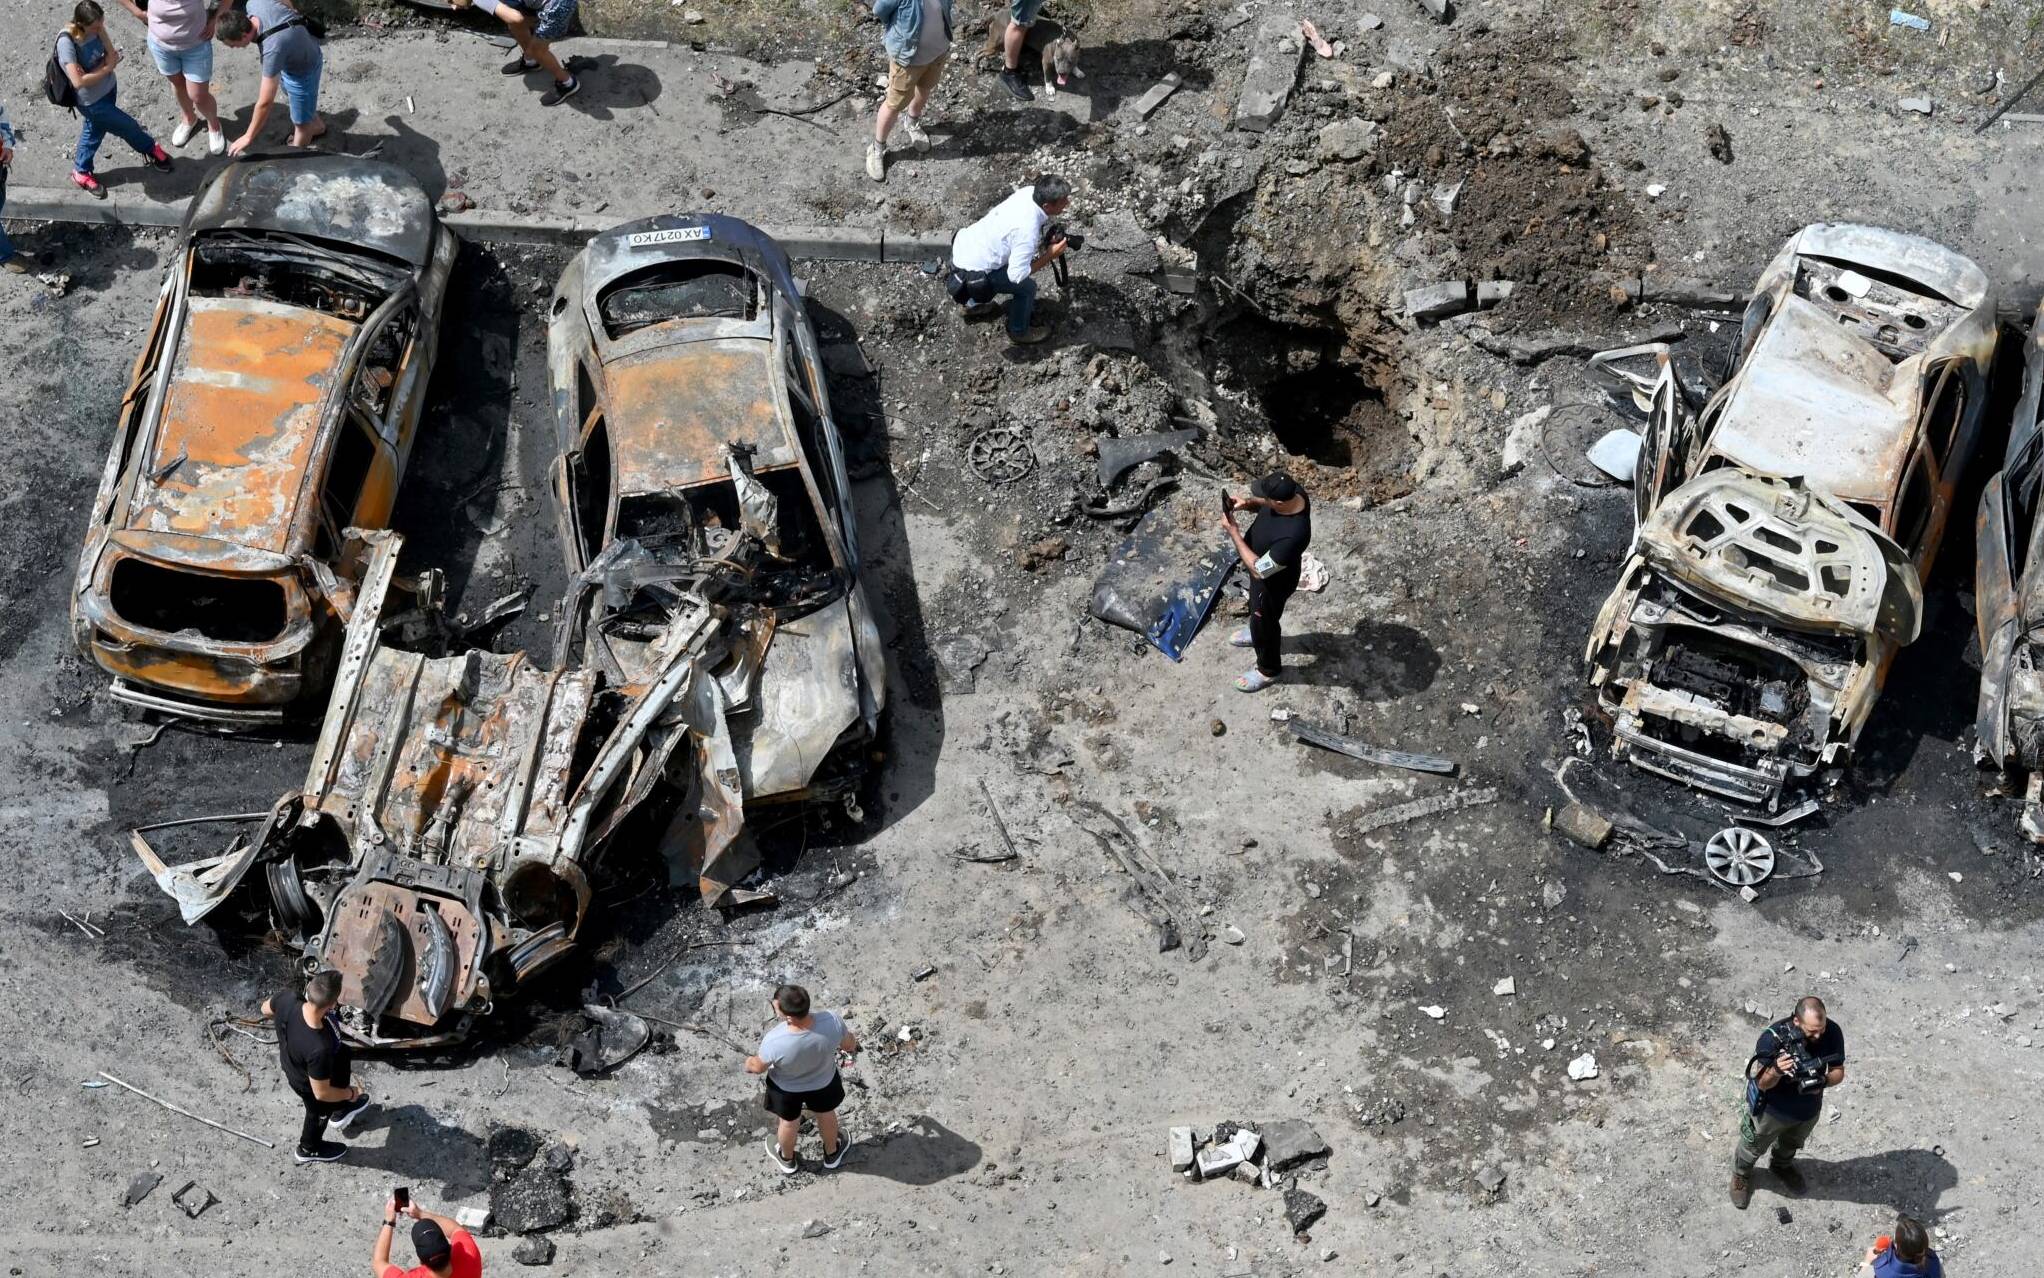 Bystanders gather around the wreckage of vehicles and a crater after Russian missiles struck the courtyard of a multi-storey residential complex on the eastern outskirts of Kharkiv on June 26, 2022, amid the Russian invasion of Ukraine. (Photo by SERGEY BOBOK / AFP)